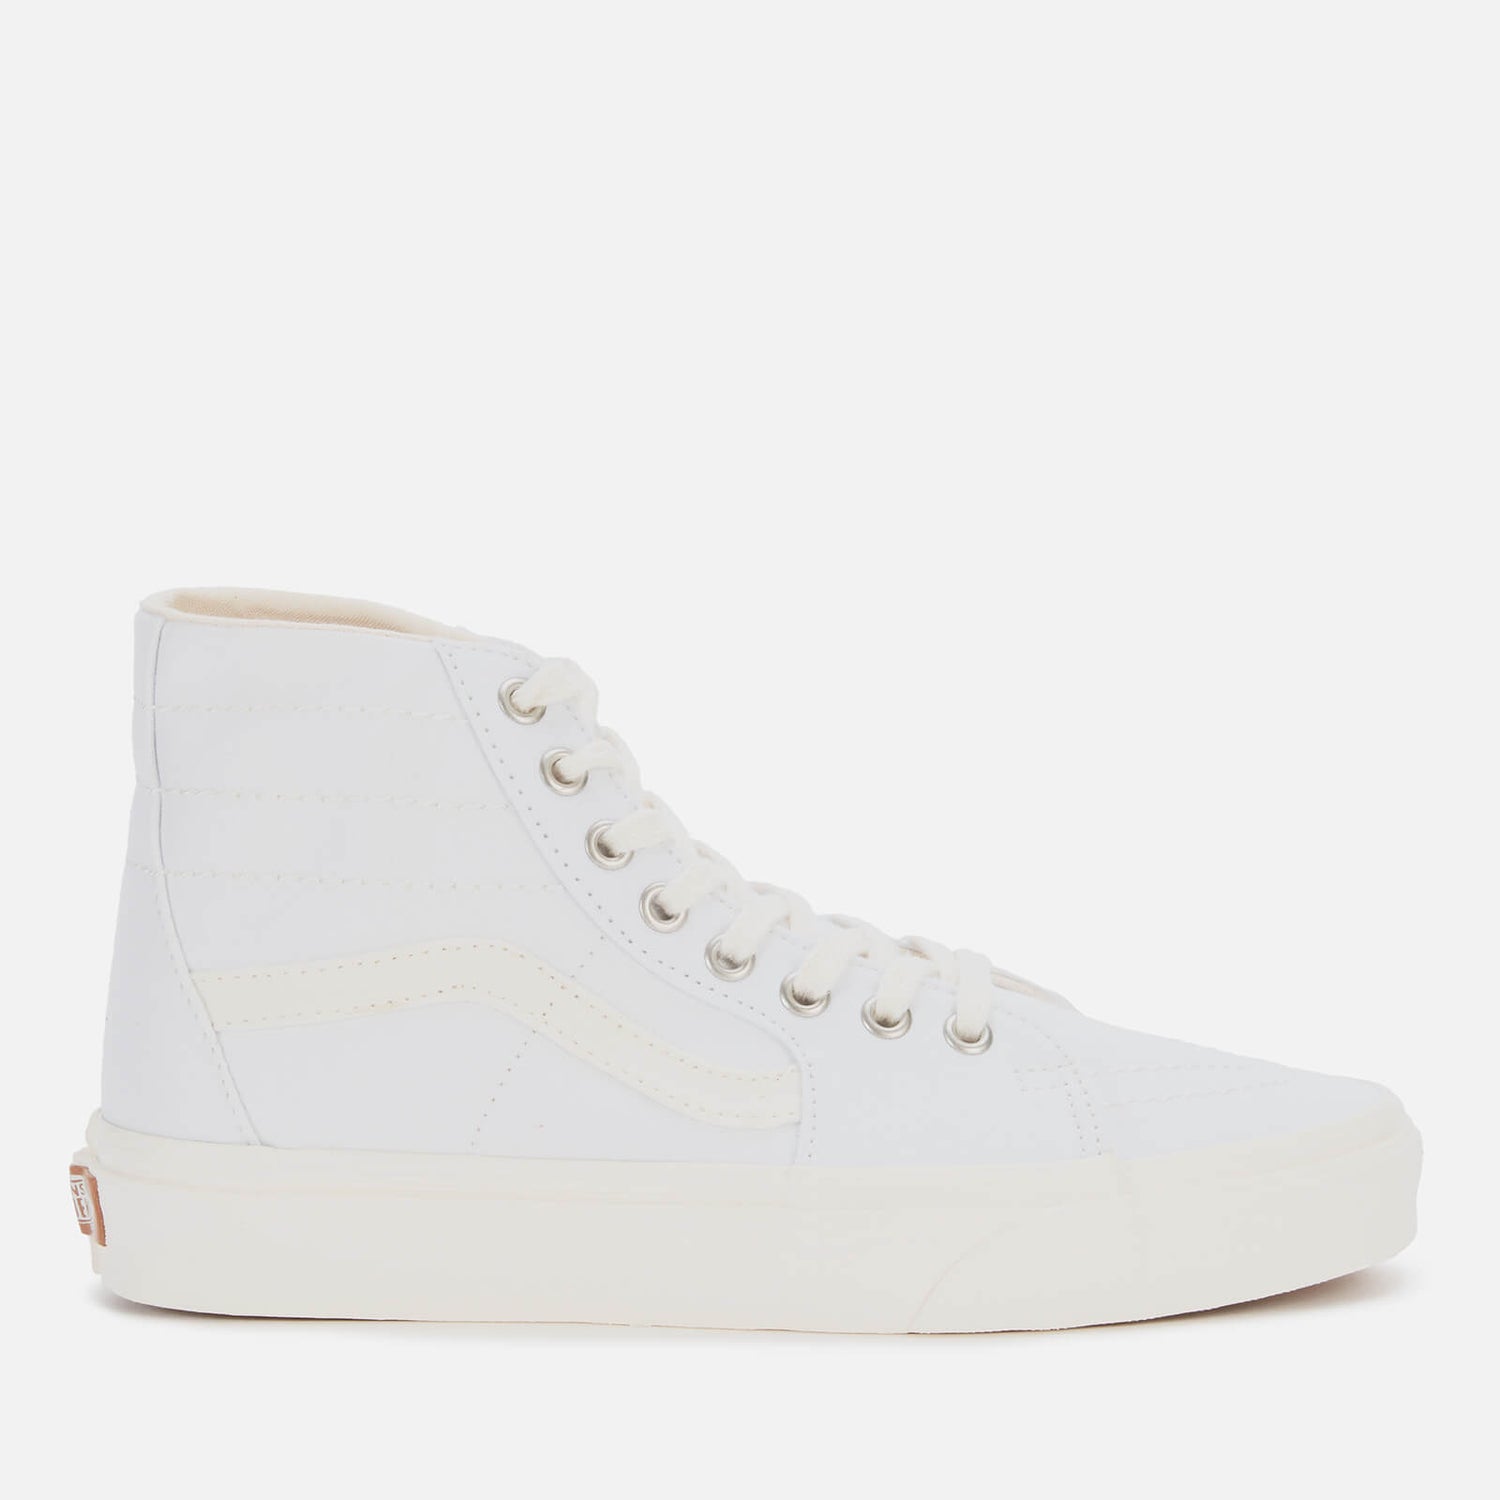 Vans Women's Eco Theory Sk8-Hi Tapered Trainers - White/Natural